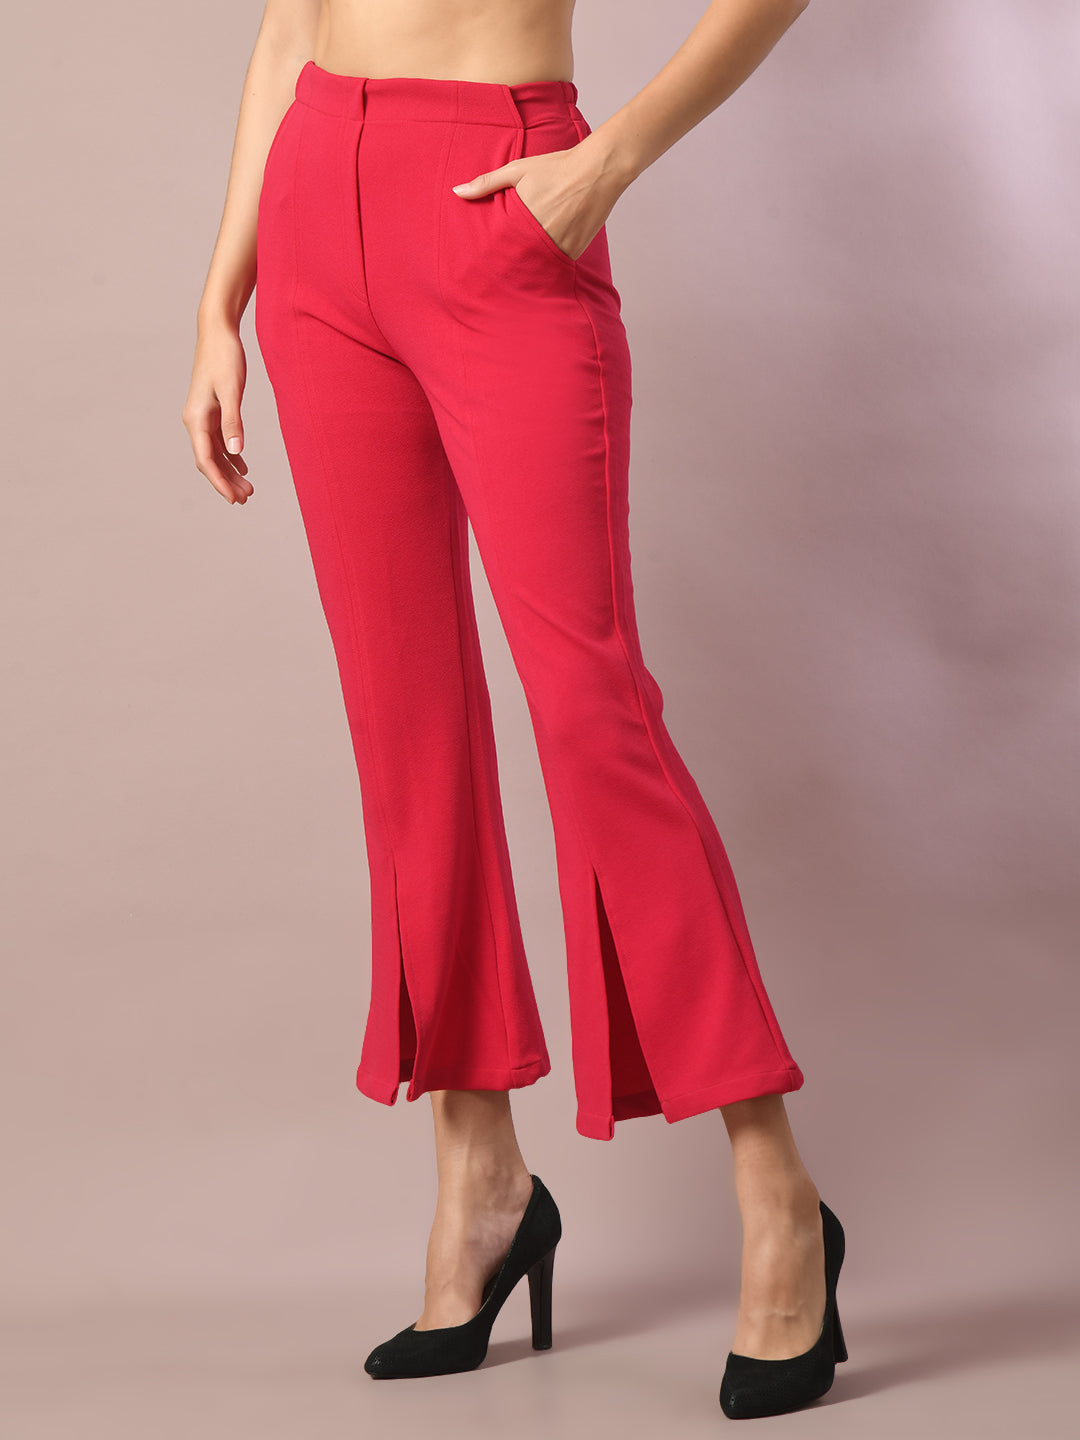 Women's  Pink Solid Party Parallel Trousers   - Myshka